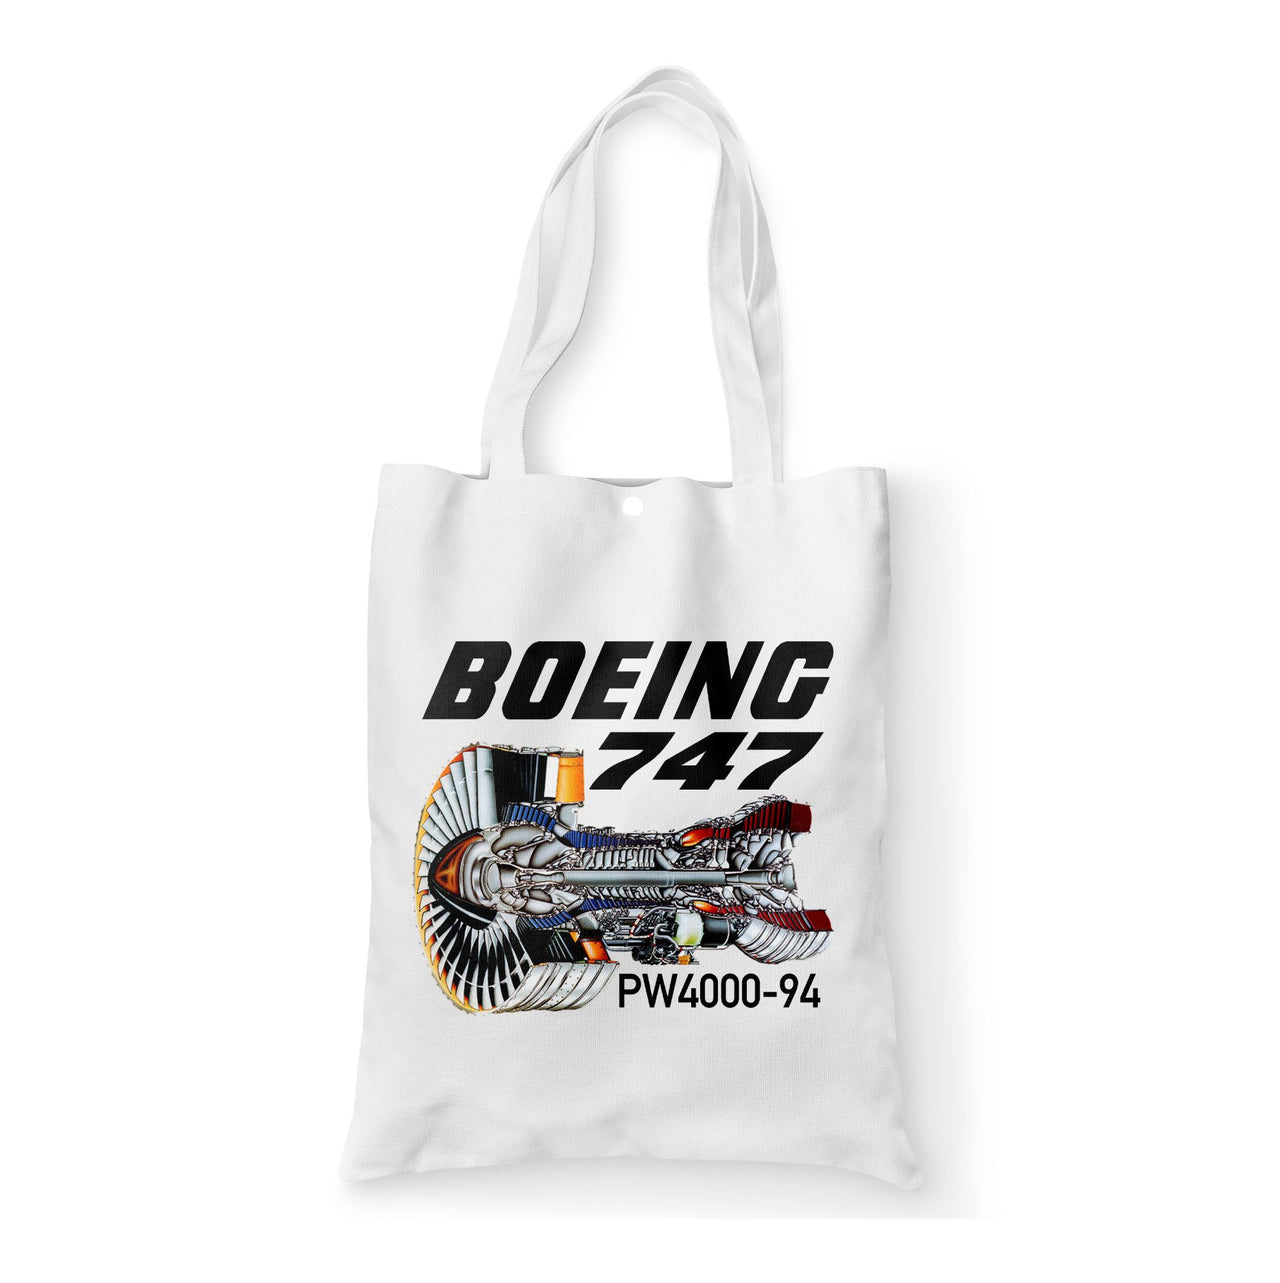 Boeing 747 & PW4000-94 Engine Designed Tote Bags